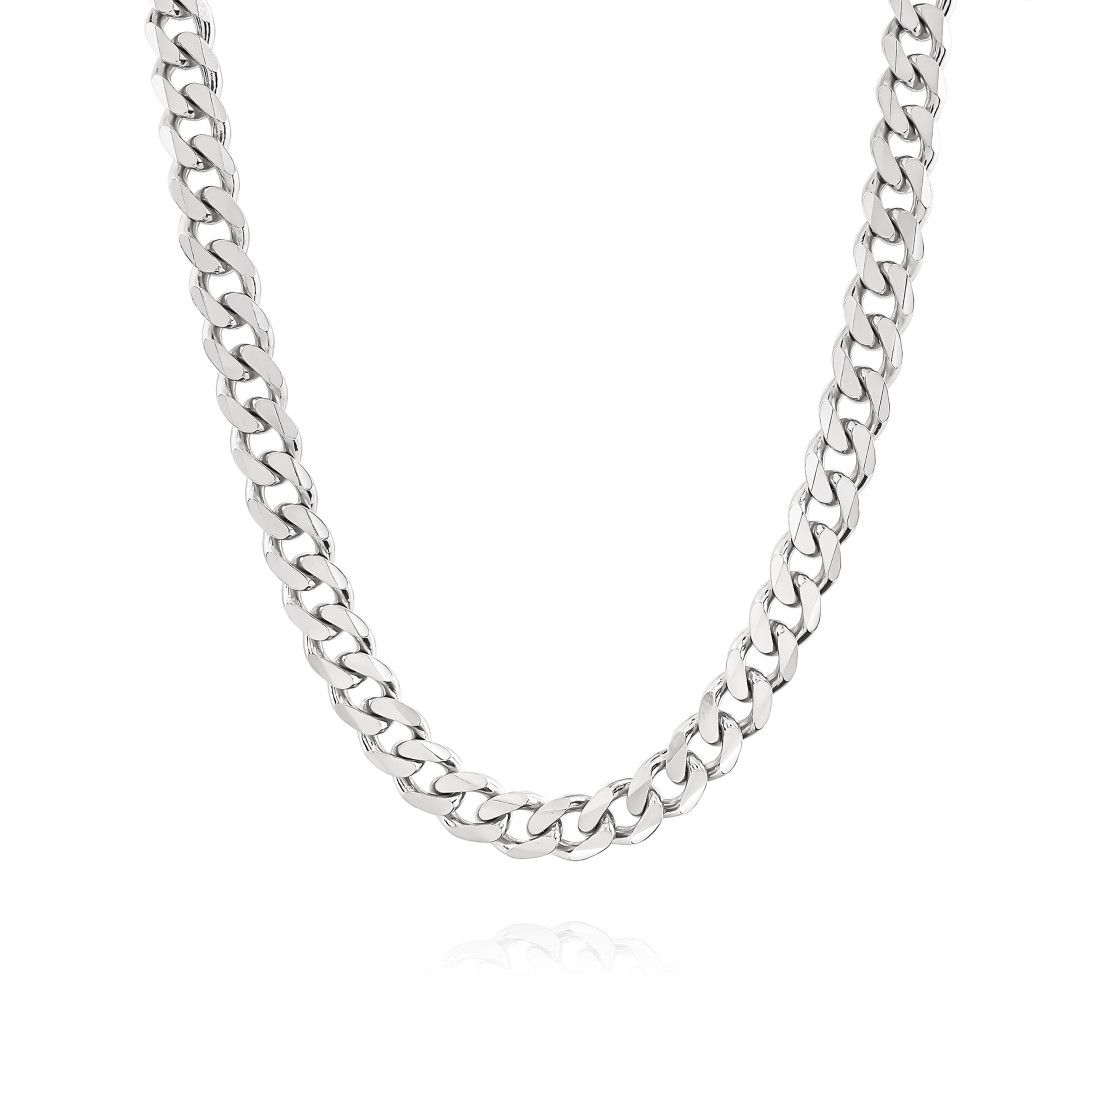 Sterling Silver 9.3mm Diamond Cut Curb Chain Necklace Heavy